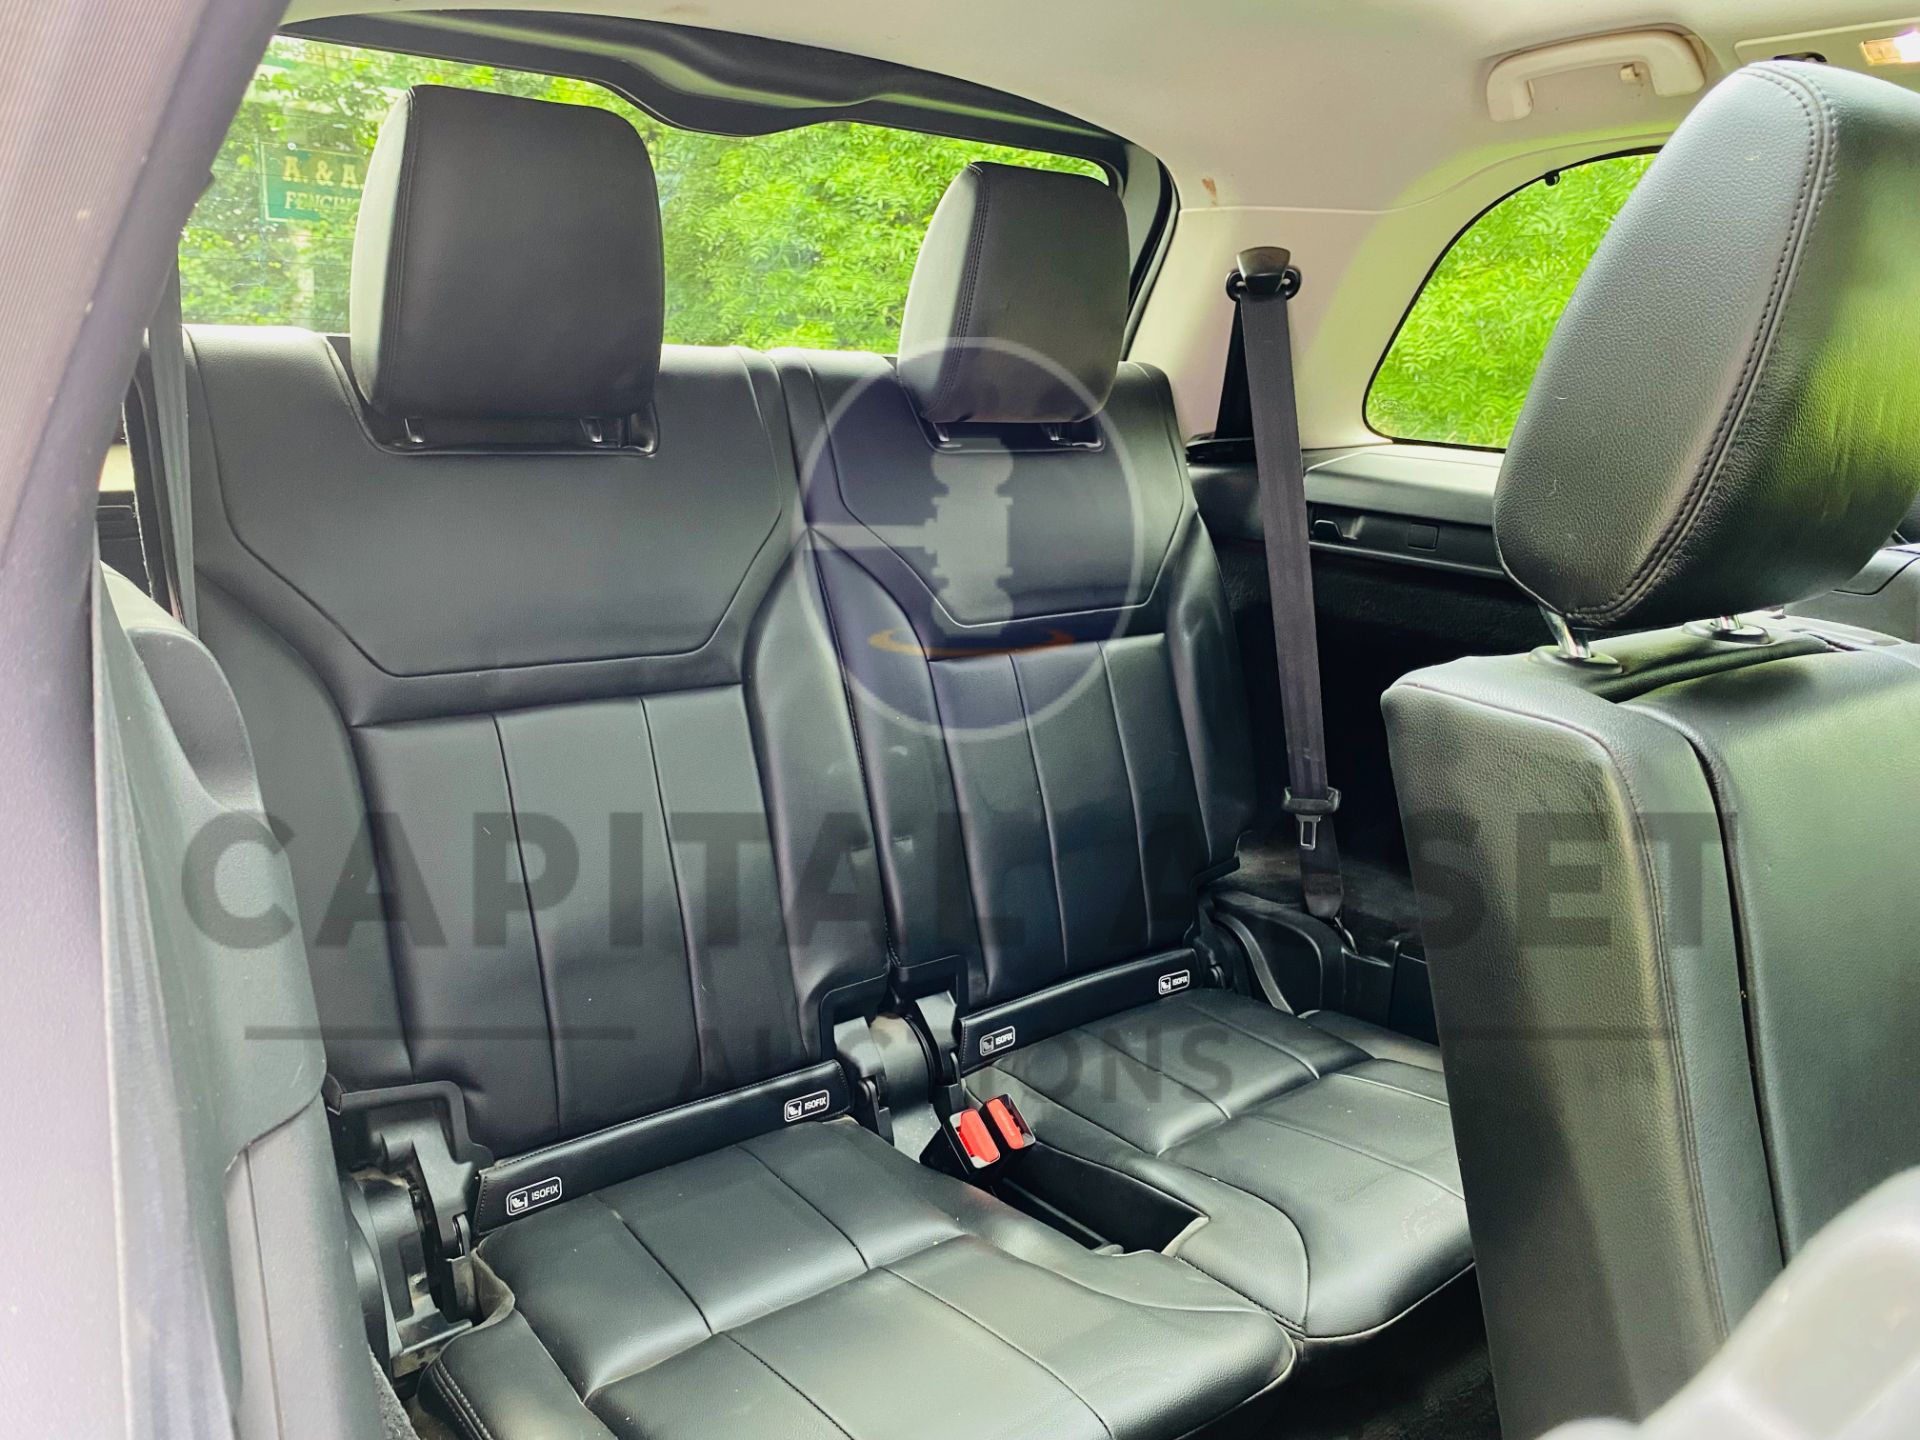 LAND ROVER DISCOVERY 5 *LANDMARK* 7 SEATER SUV (2020 - EURO 6) 3.0 SD6 - 8 SPEED AUTO *FULLY LOADED* - Image 34 of 63